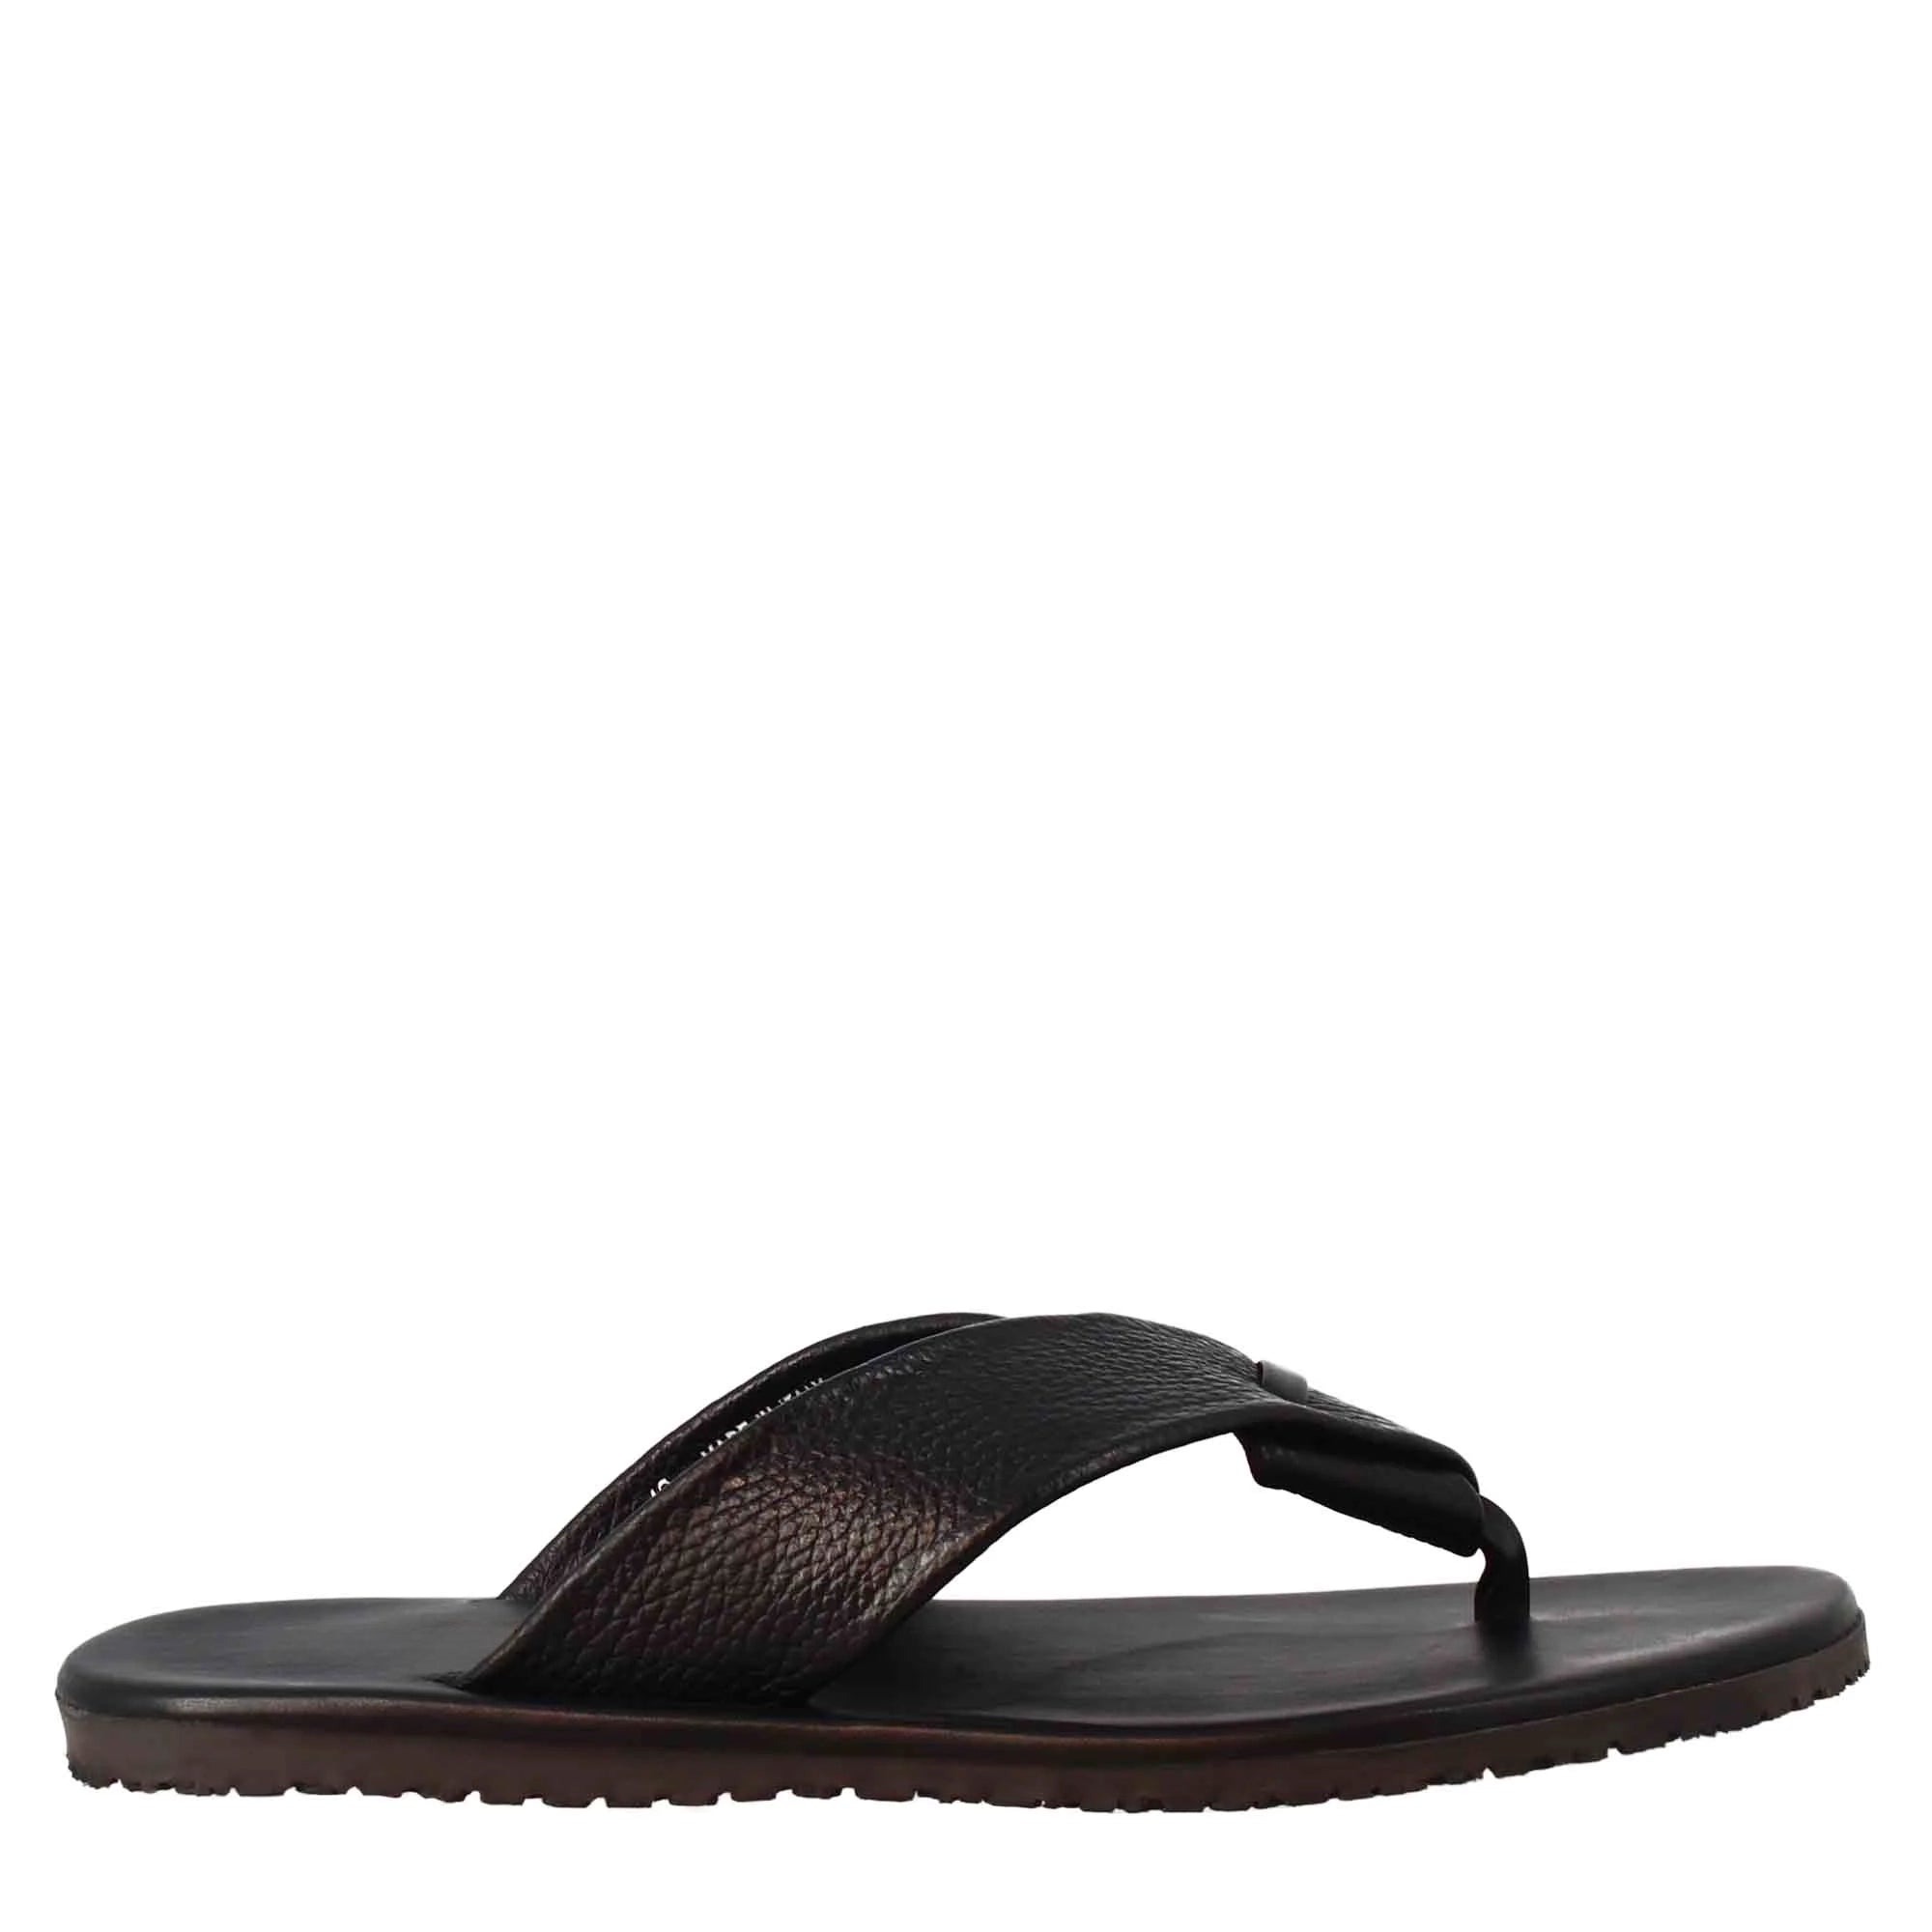 Black Leather Thong Sandals